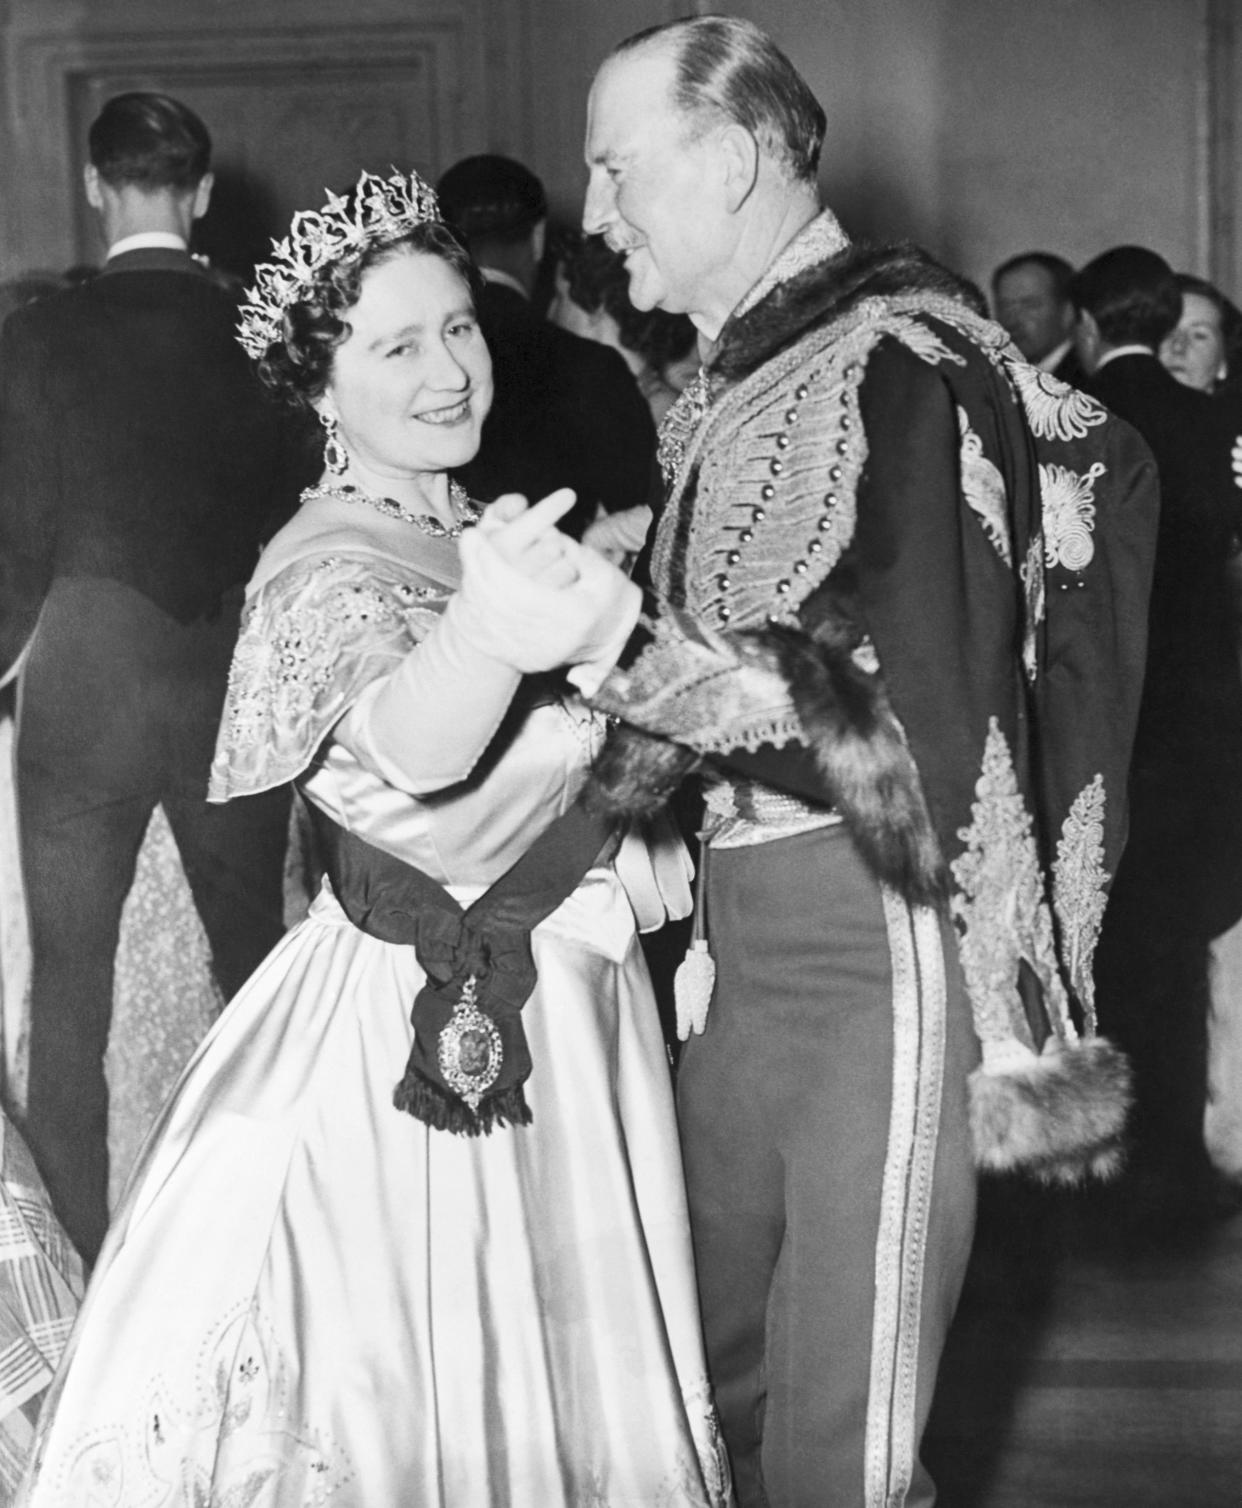 (Original Caption) 11/29/1954- London, England- Queen Mother Elizabeth is shown dancing with Hussar Colone Combe at the Balaclava Ball in London. Her daughter, Queen Elizabeth II, was also at the affair which was in observance of the Centenary of the Battle of Balaclava.